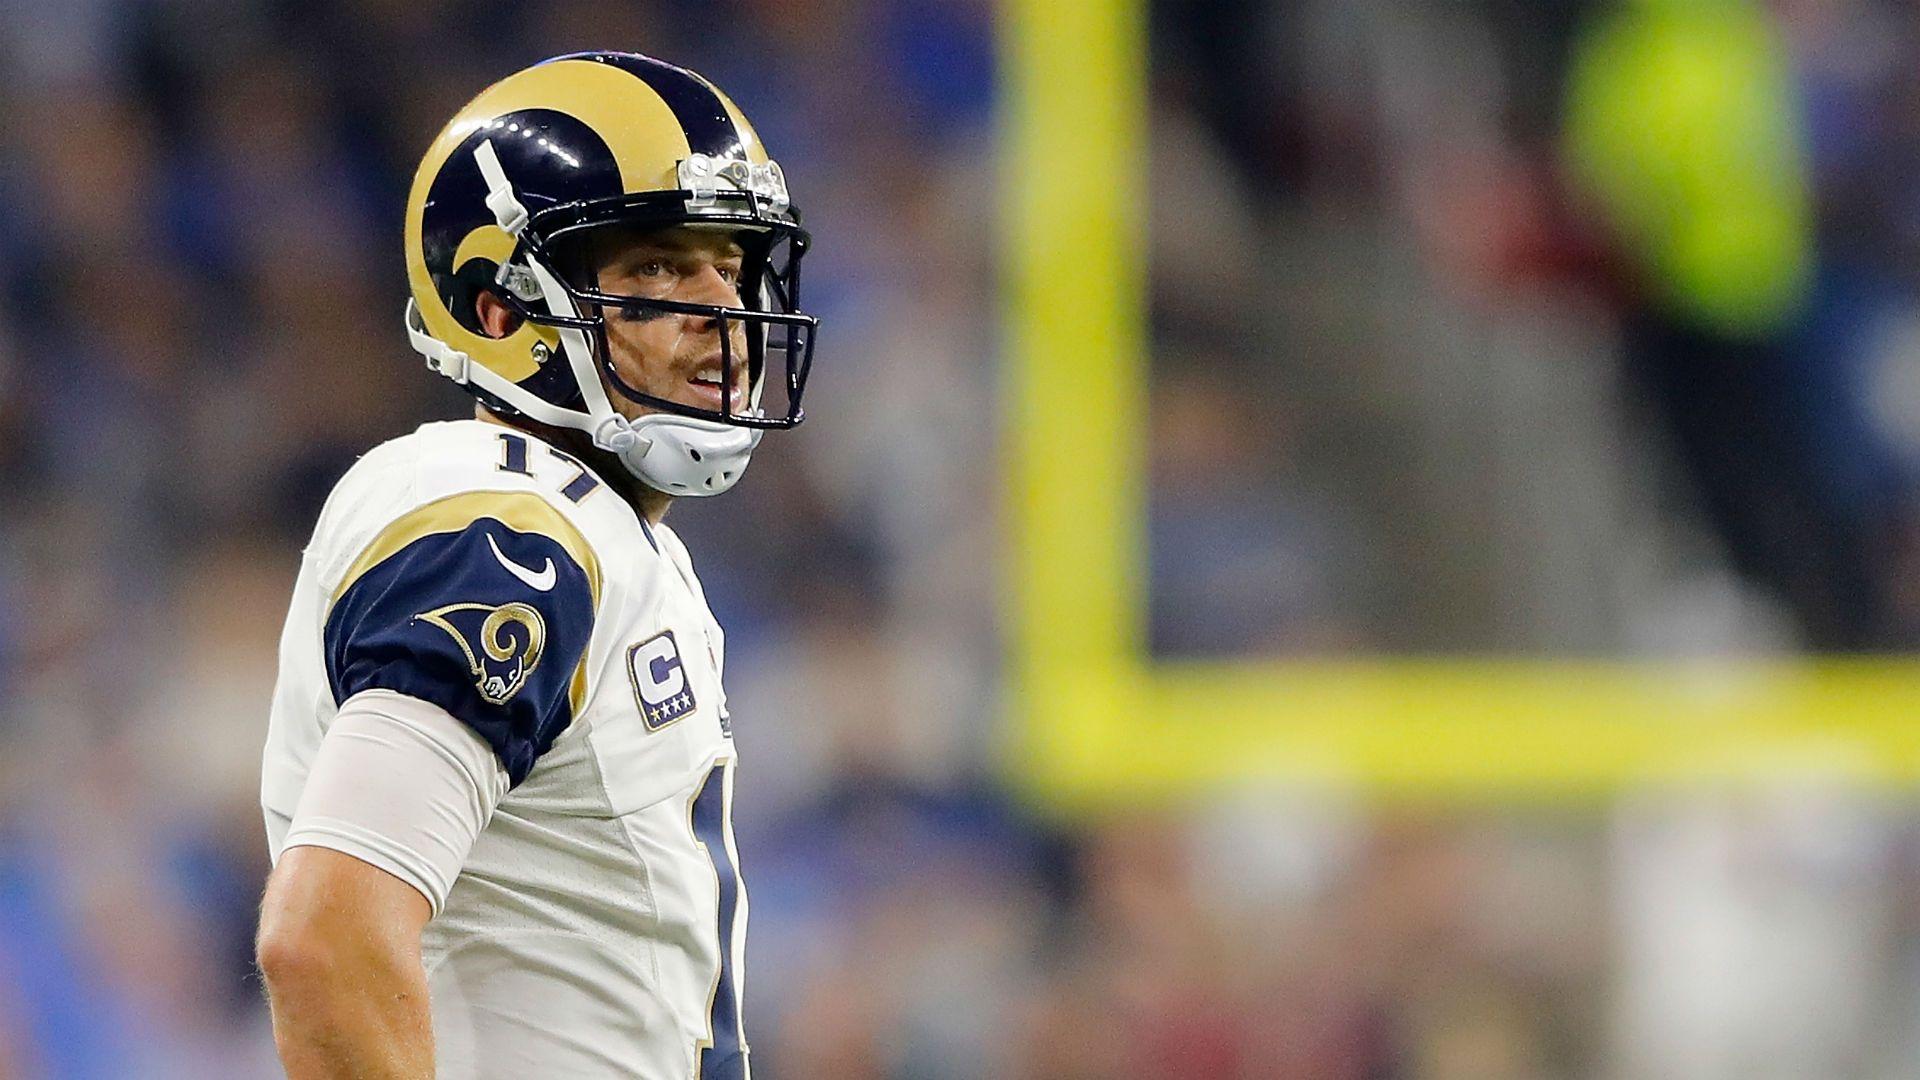 Leave it to Rams to waste Case Keenum's historic game. NFL